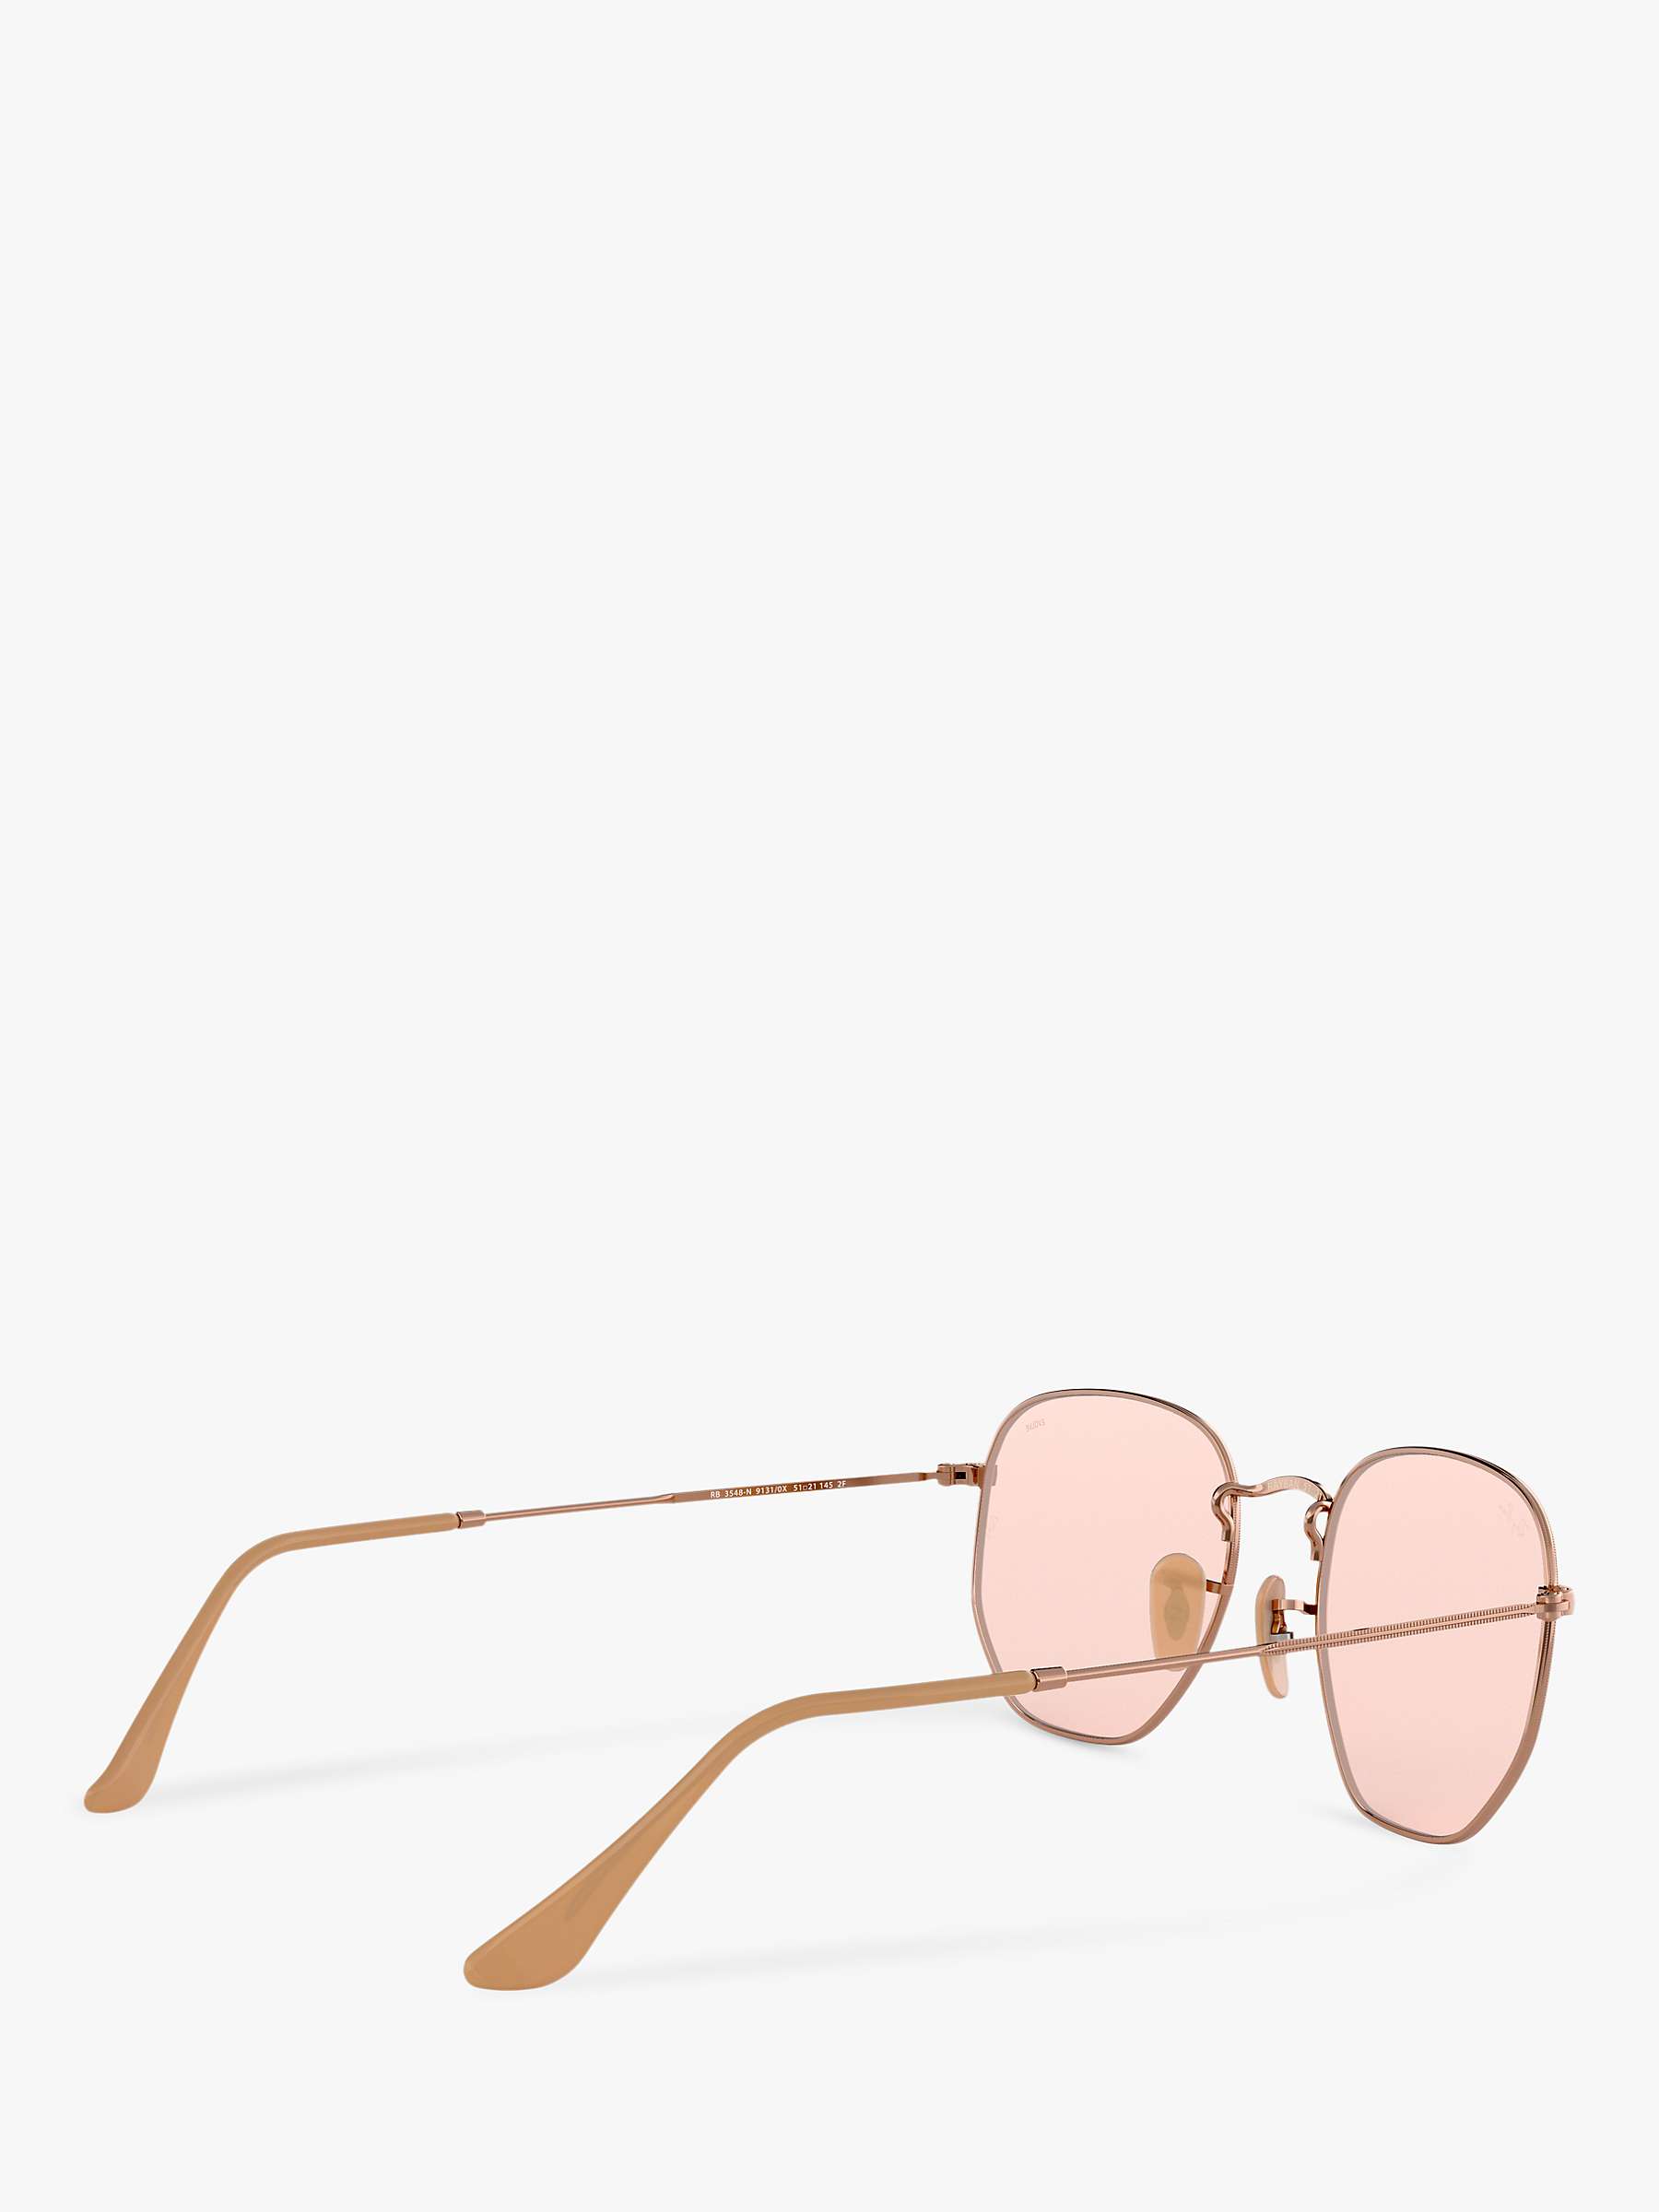 Buy Ray-Ban RB3548N Hexgonal Sunglasses, Copper/Pink Online at johnlewis.com